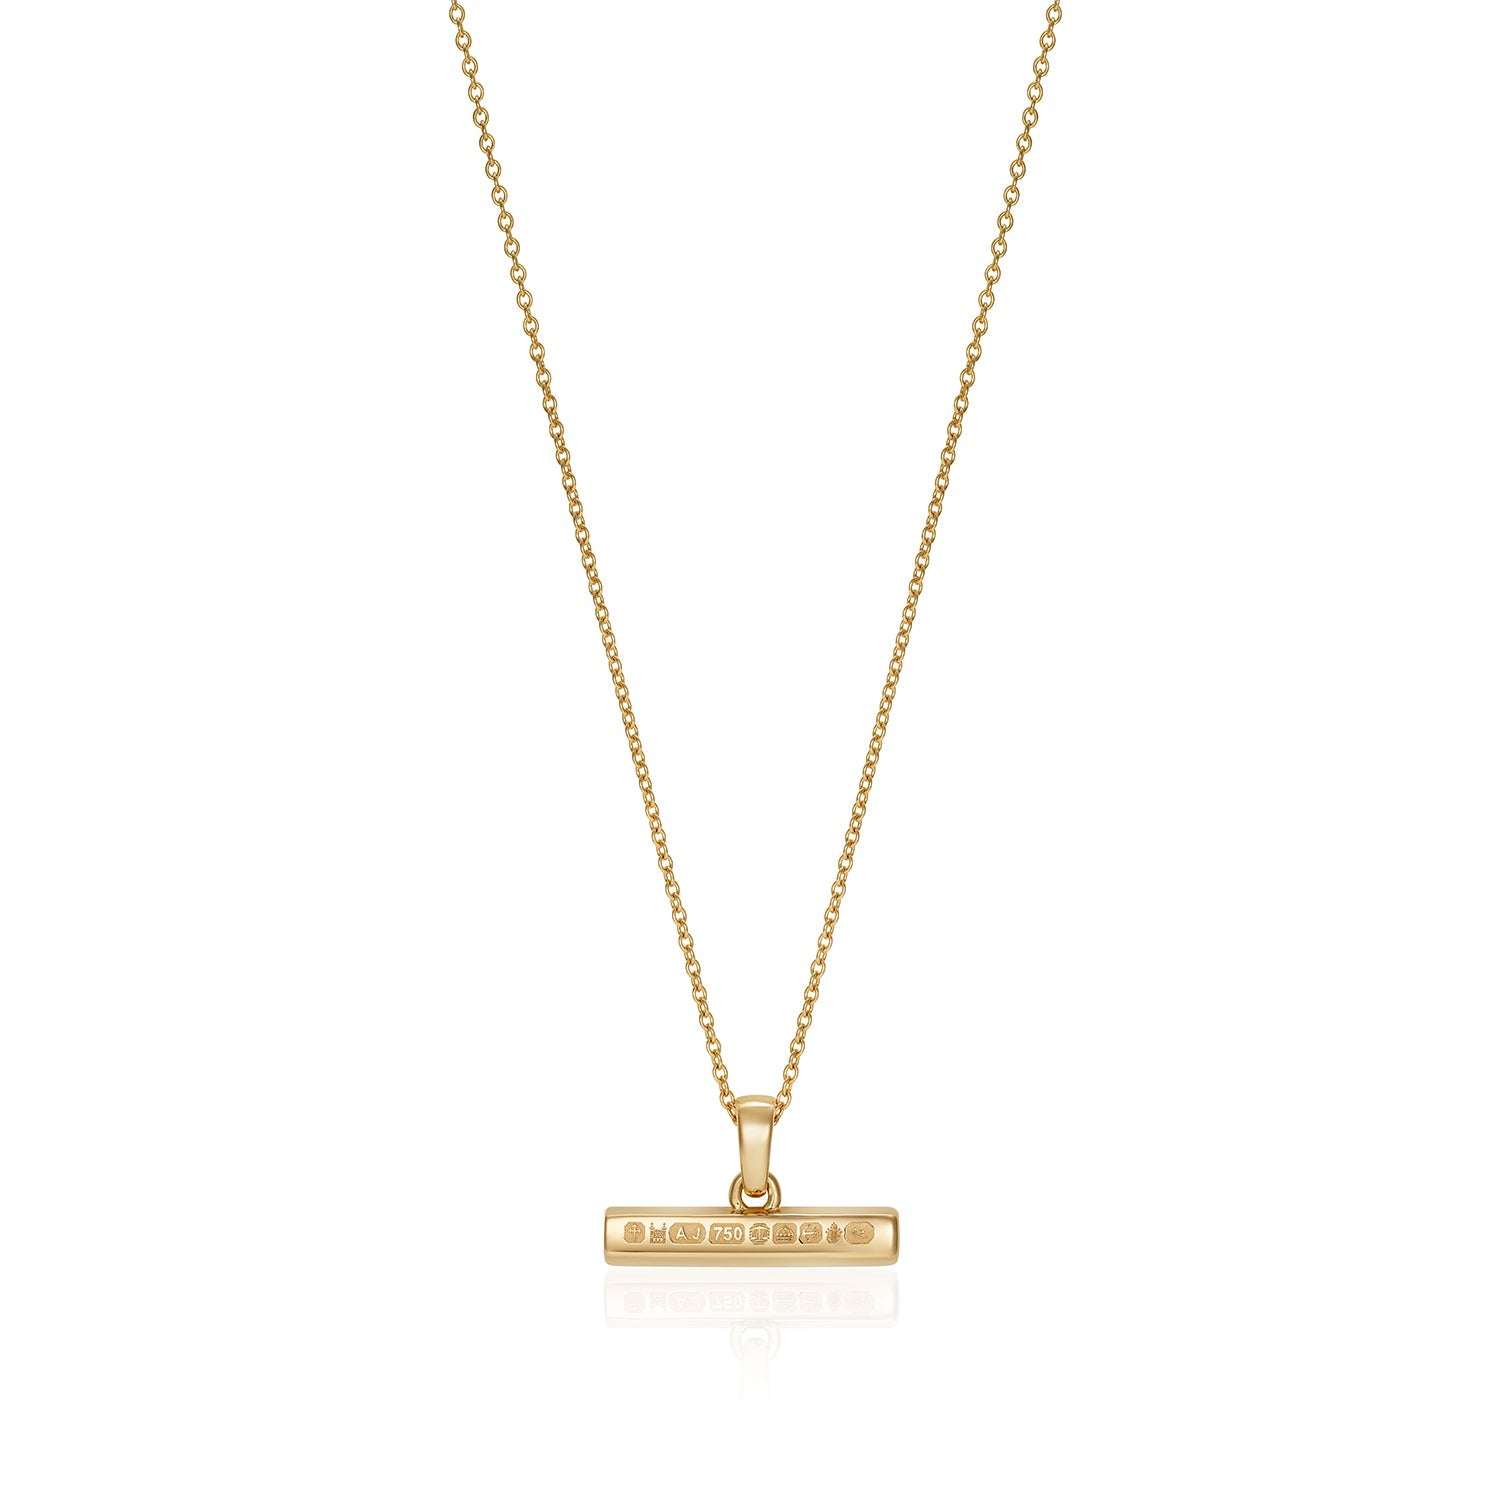 886 Royal Mint Necklaces 886 Small T-Bar Pendant with Chain in 18ct Yellow Gold